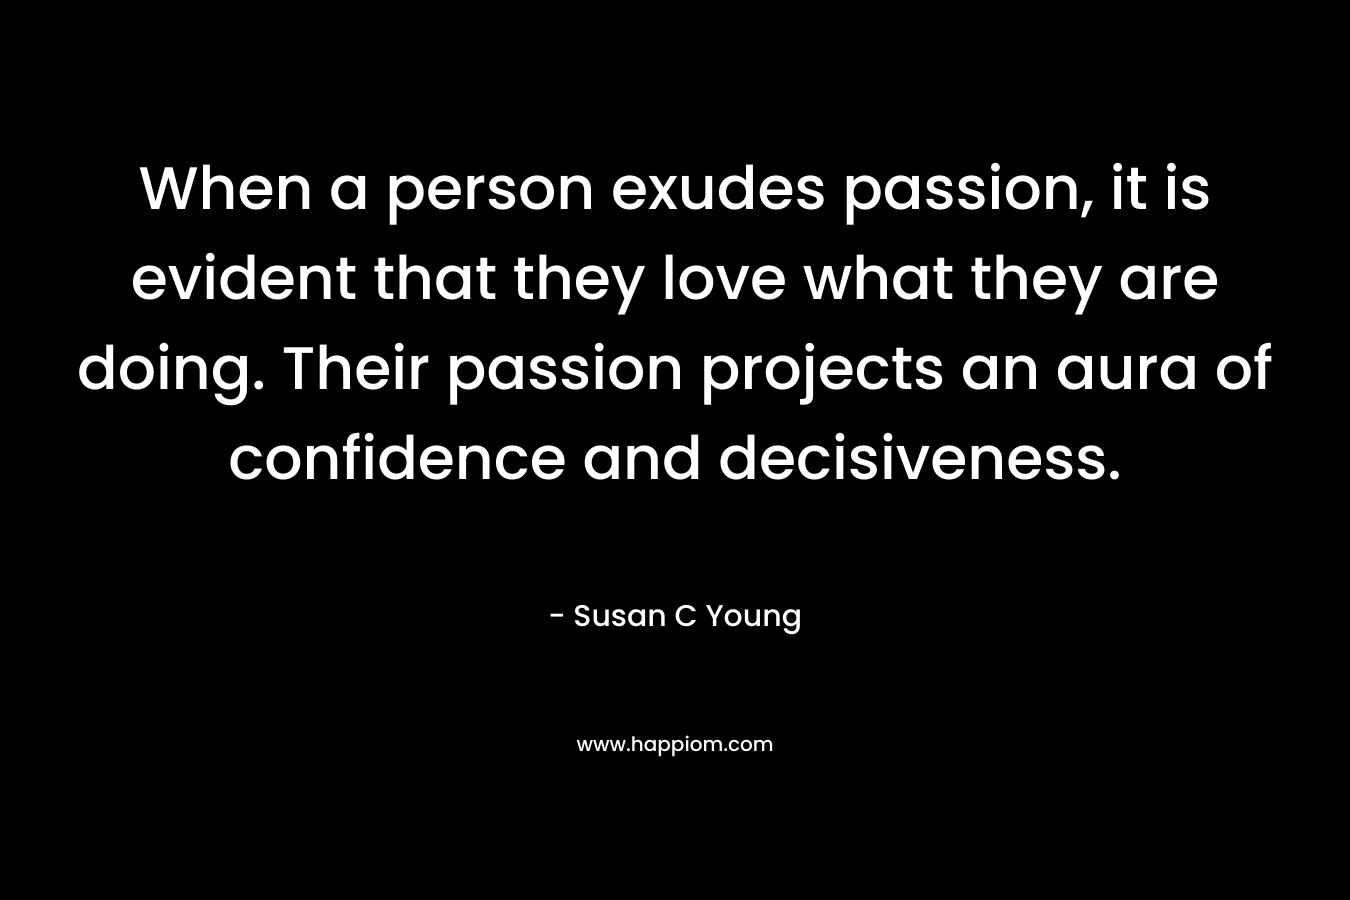 When a person exudes passion, it is evident that they love what they are doing. Their passion projects an aura of confidence and decisiveness. – Susan C Young